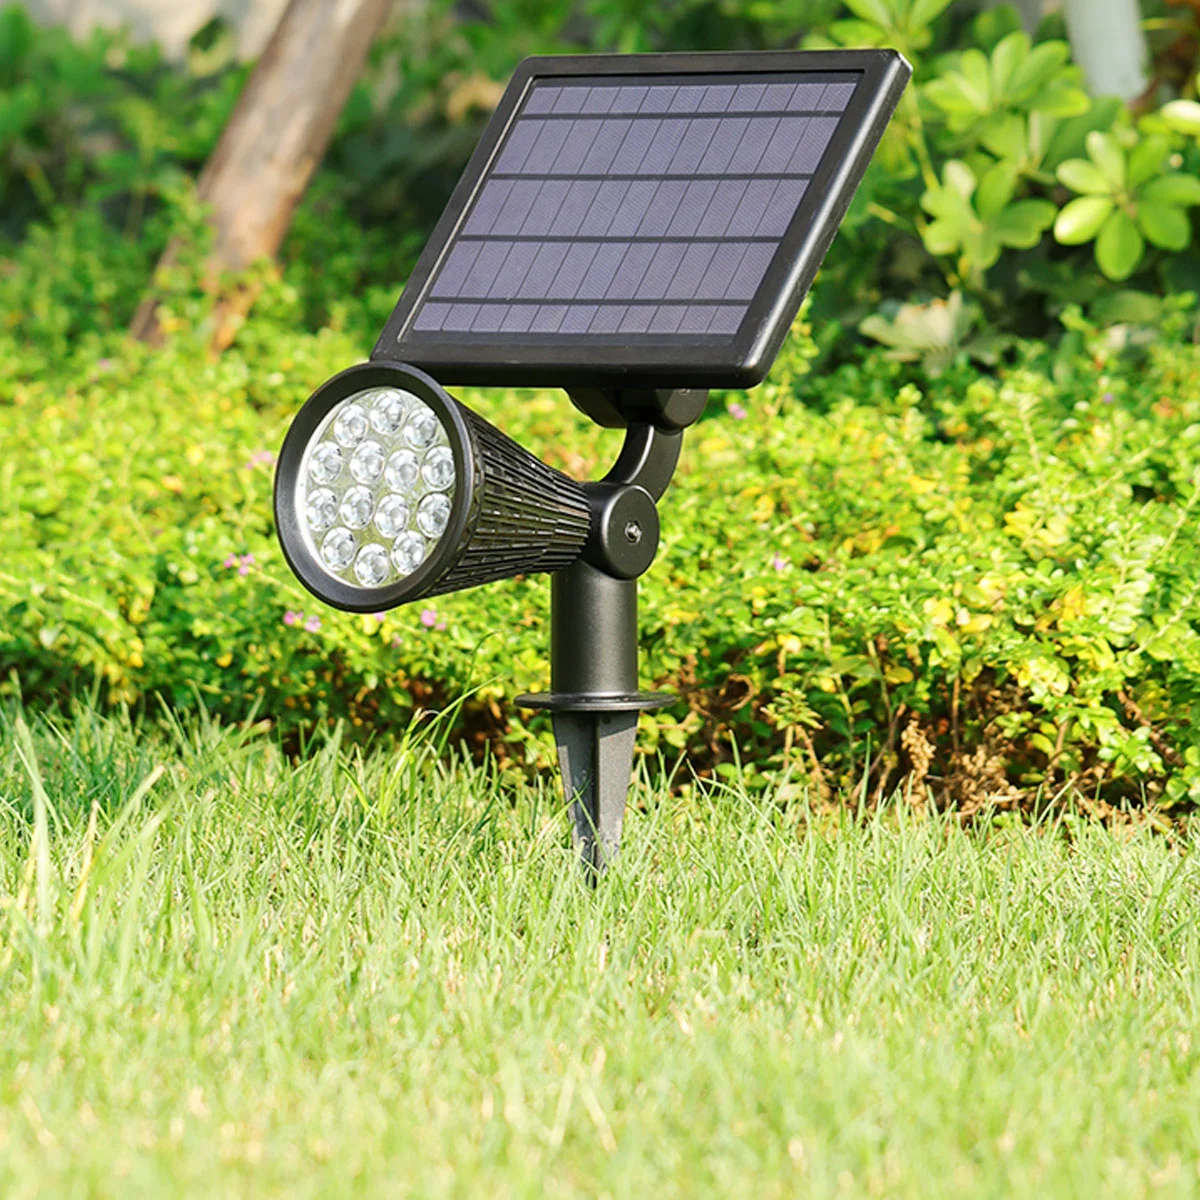 

Stakes Ground Lights Spikes Light Solar Lawn Lamp Garden Spike Landscapereplacement Lamps Outdoor Torch Led Plug Alloymini